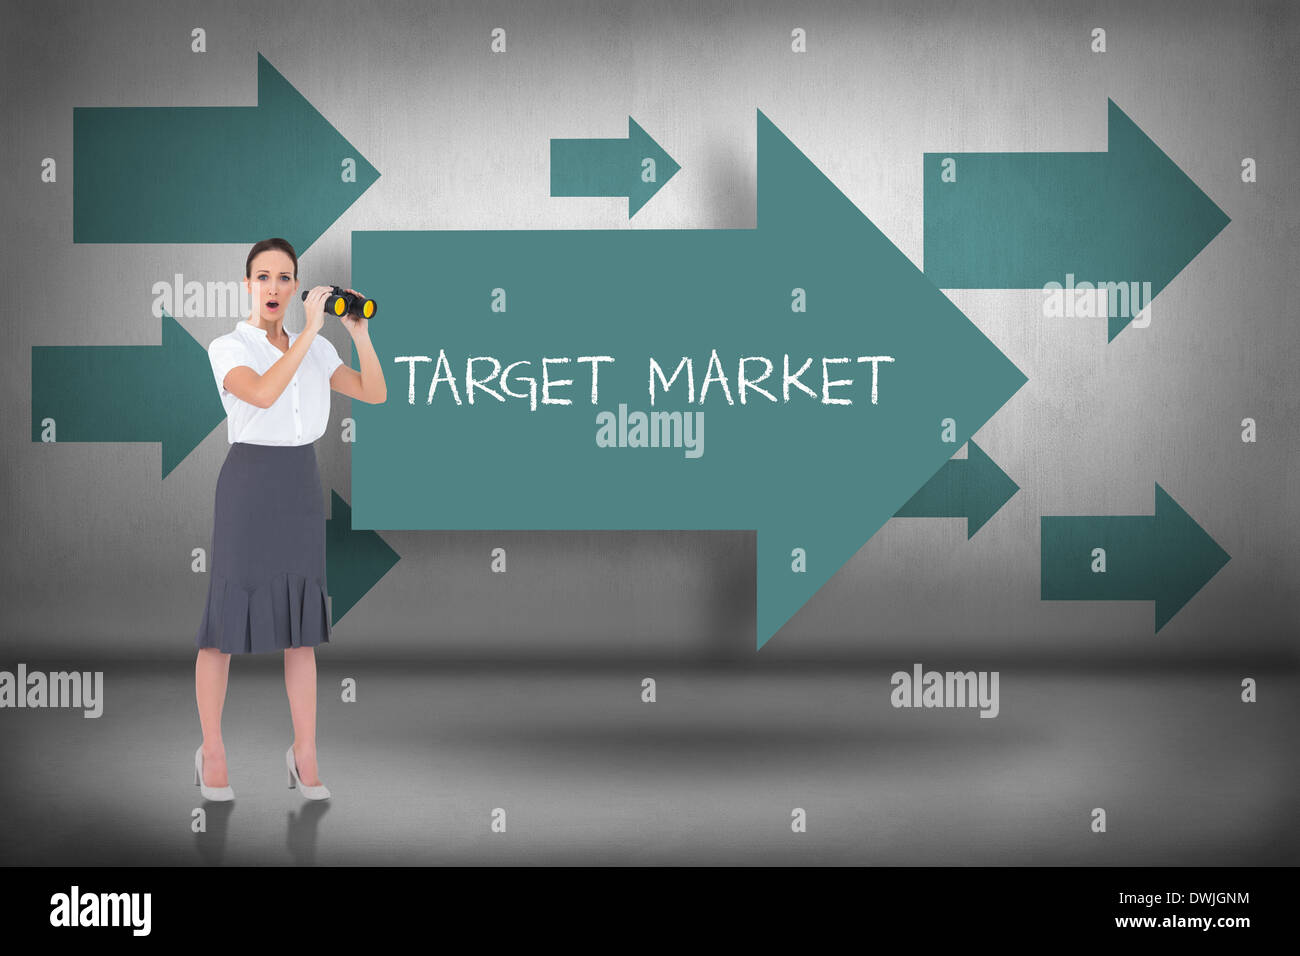 Target market against blue arrows pointing Stock Photo